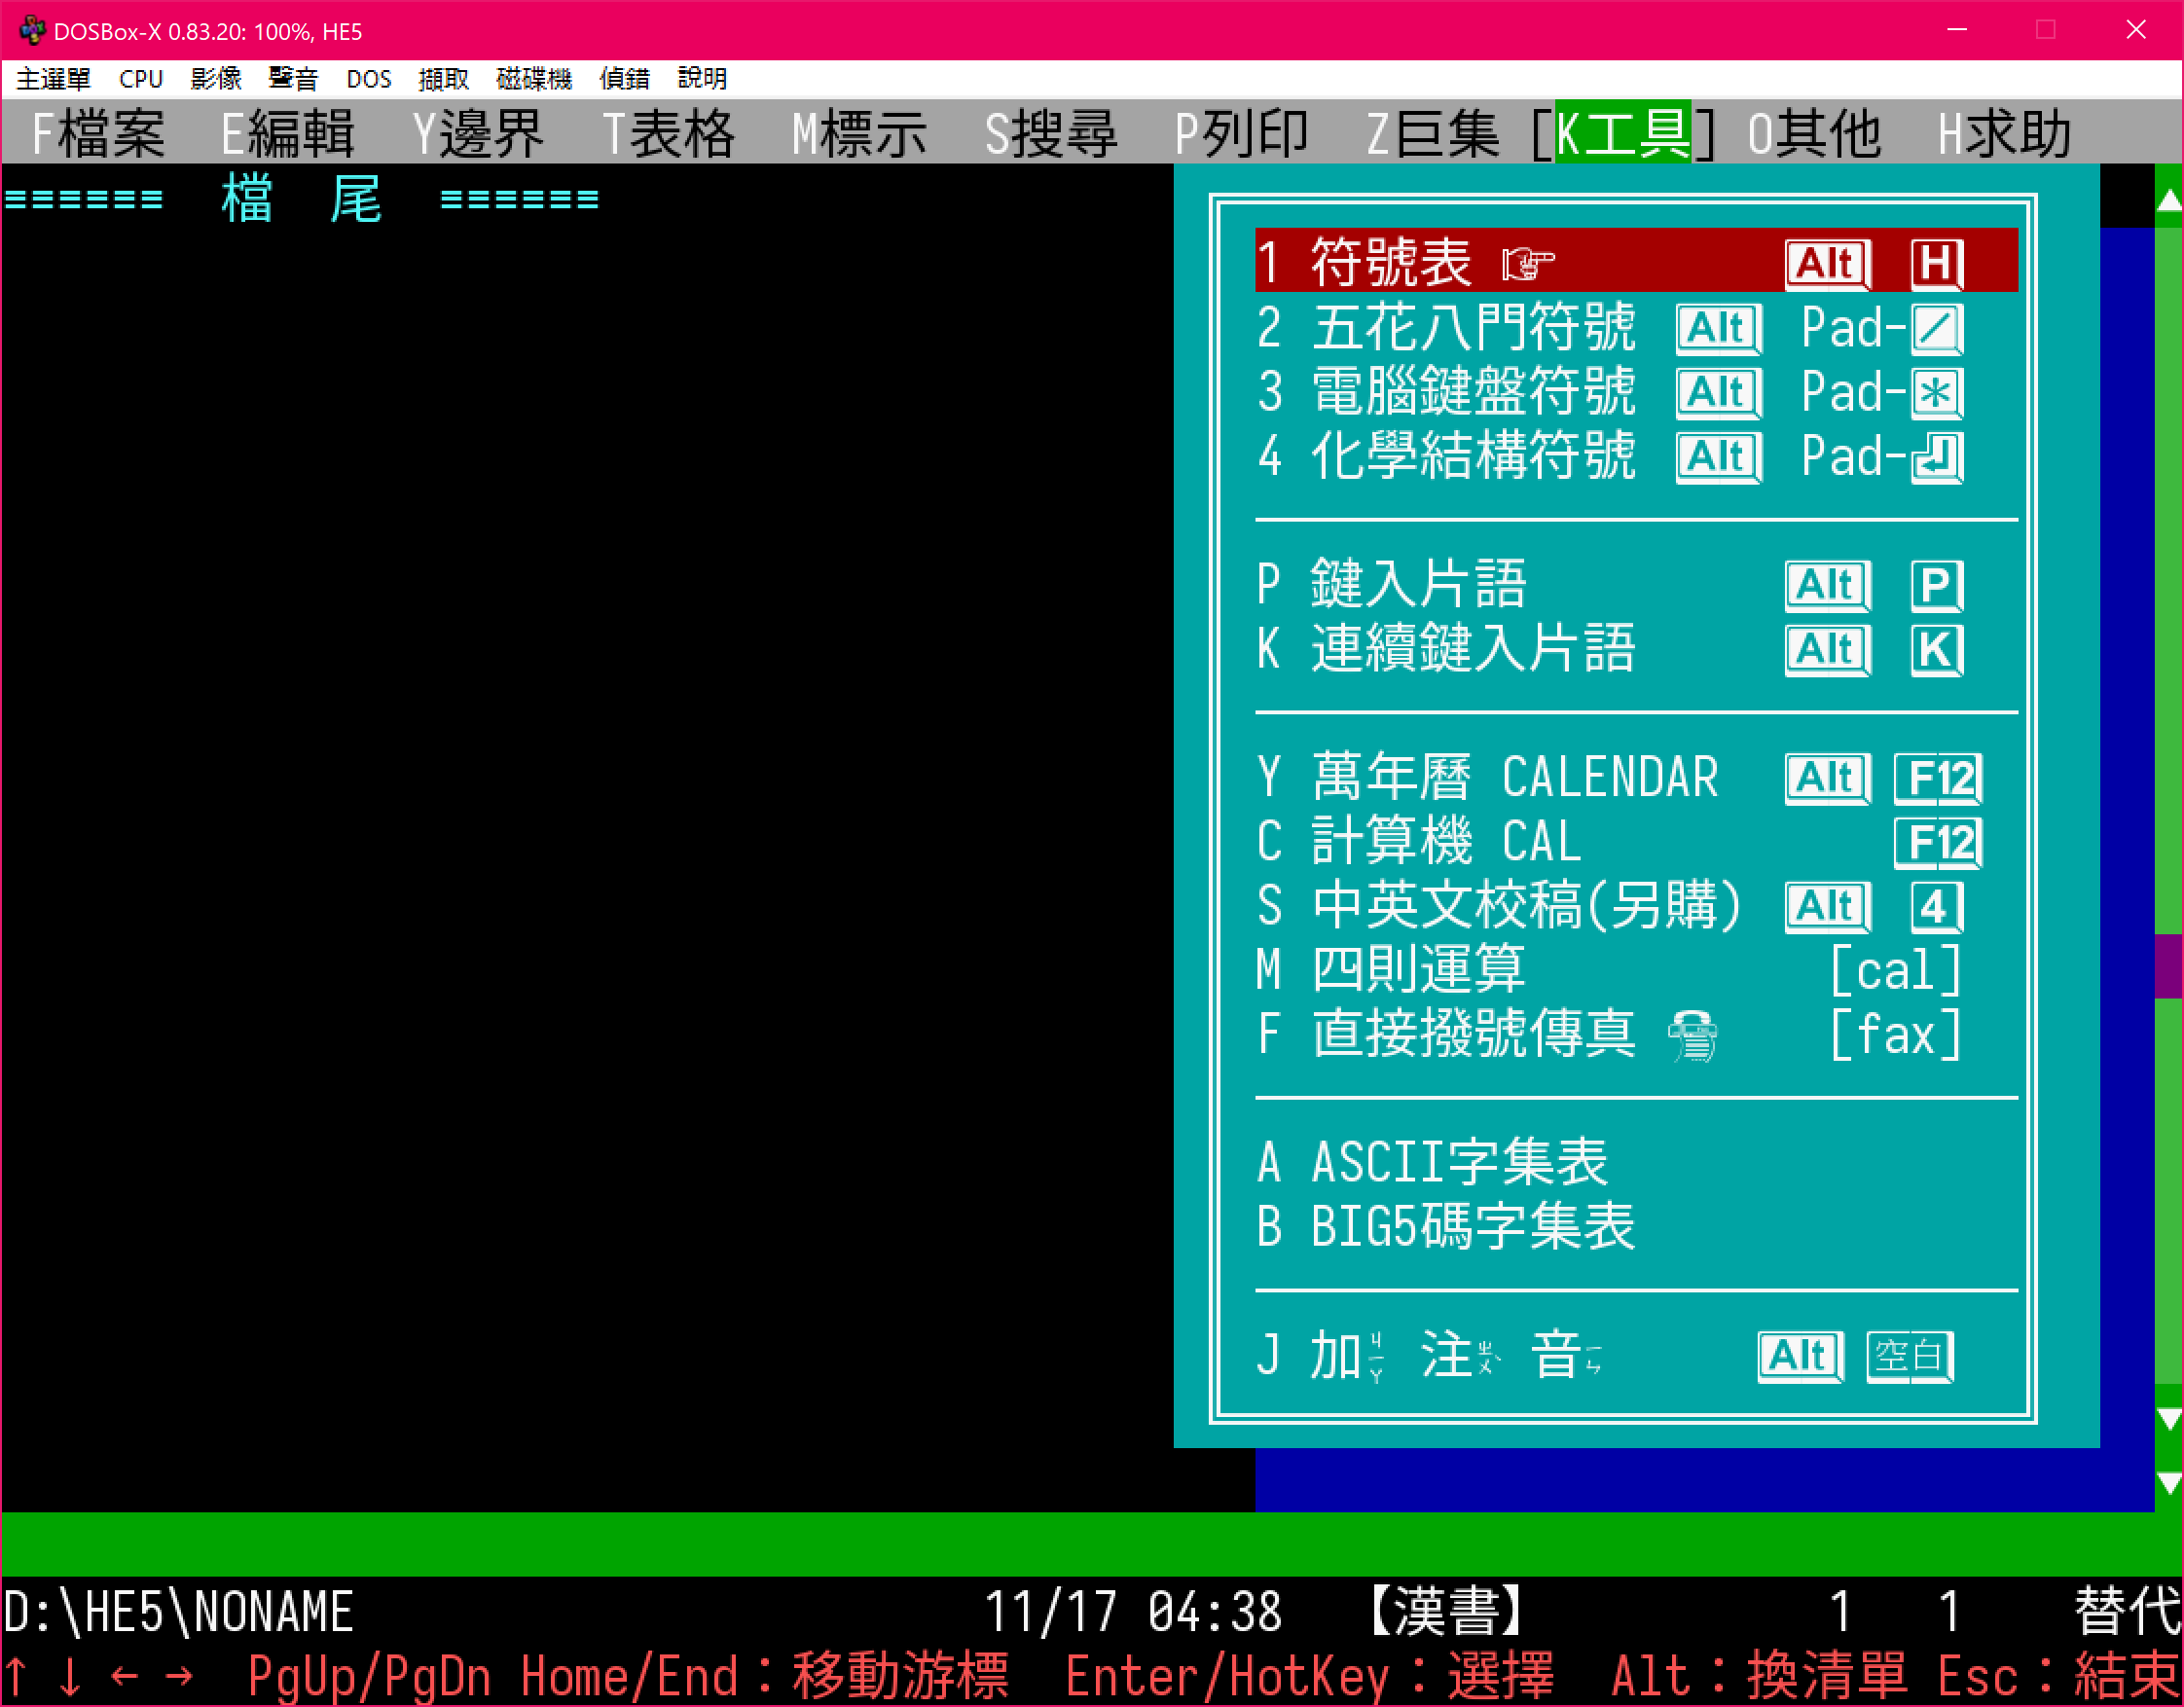 Traditional Chinese TTF mode in DOSBox-X